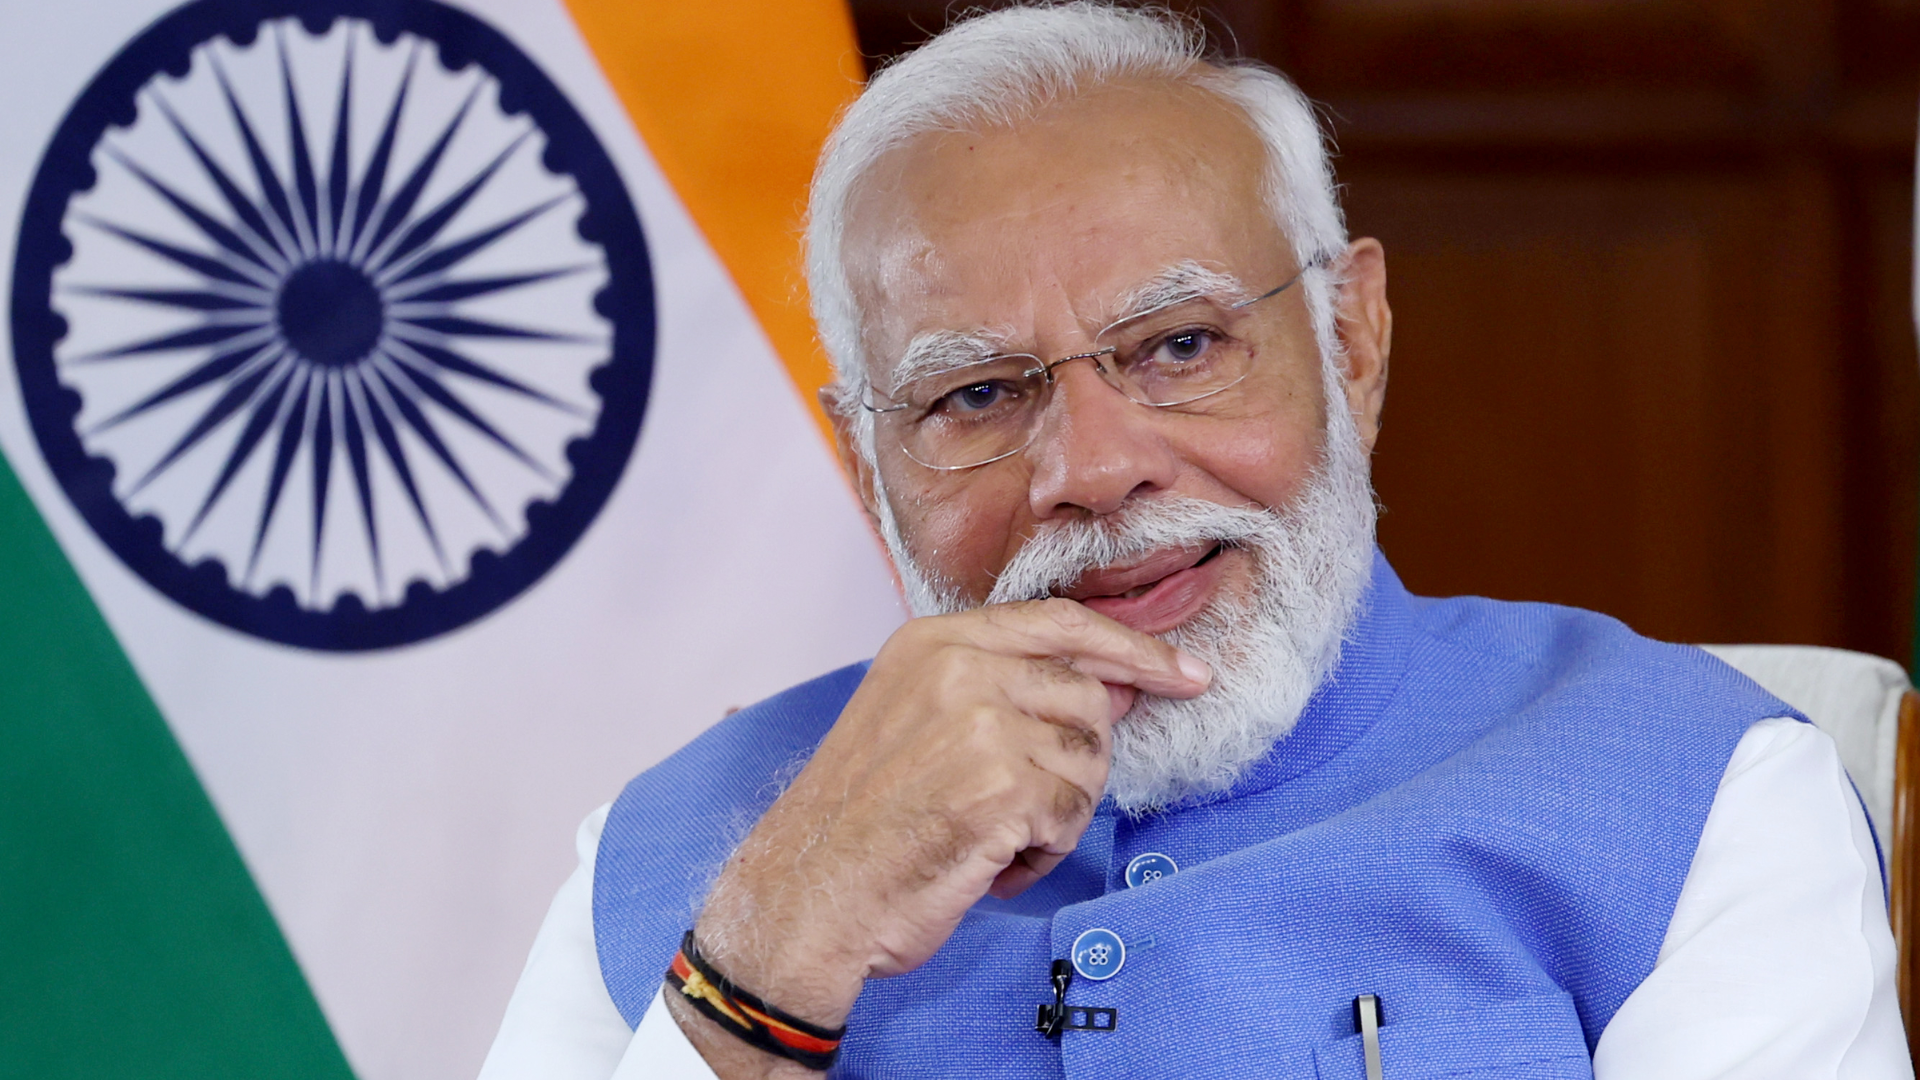 Ahead of PM Modi’s Visit, Police Issues Warning